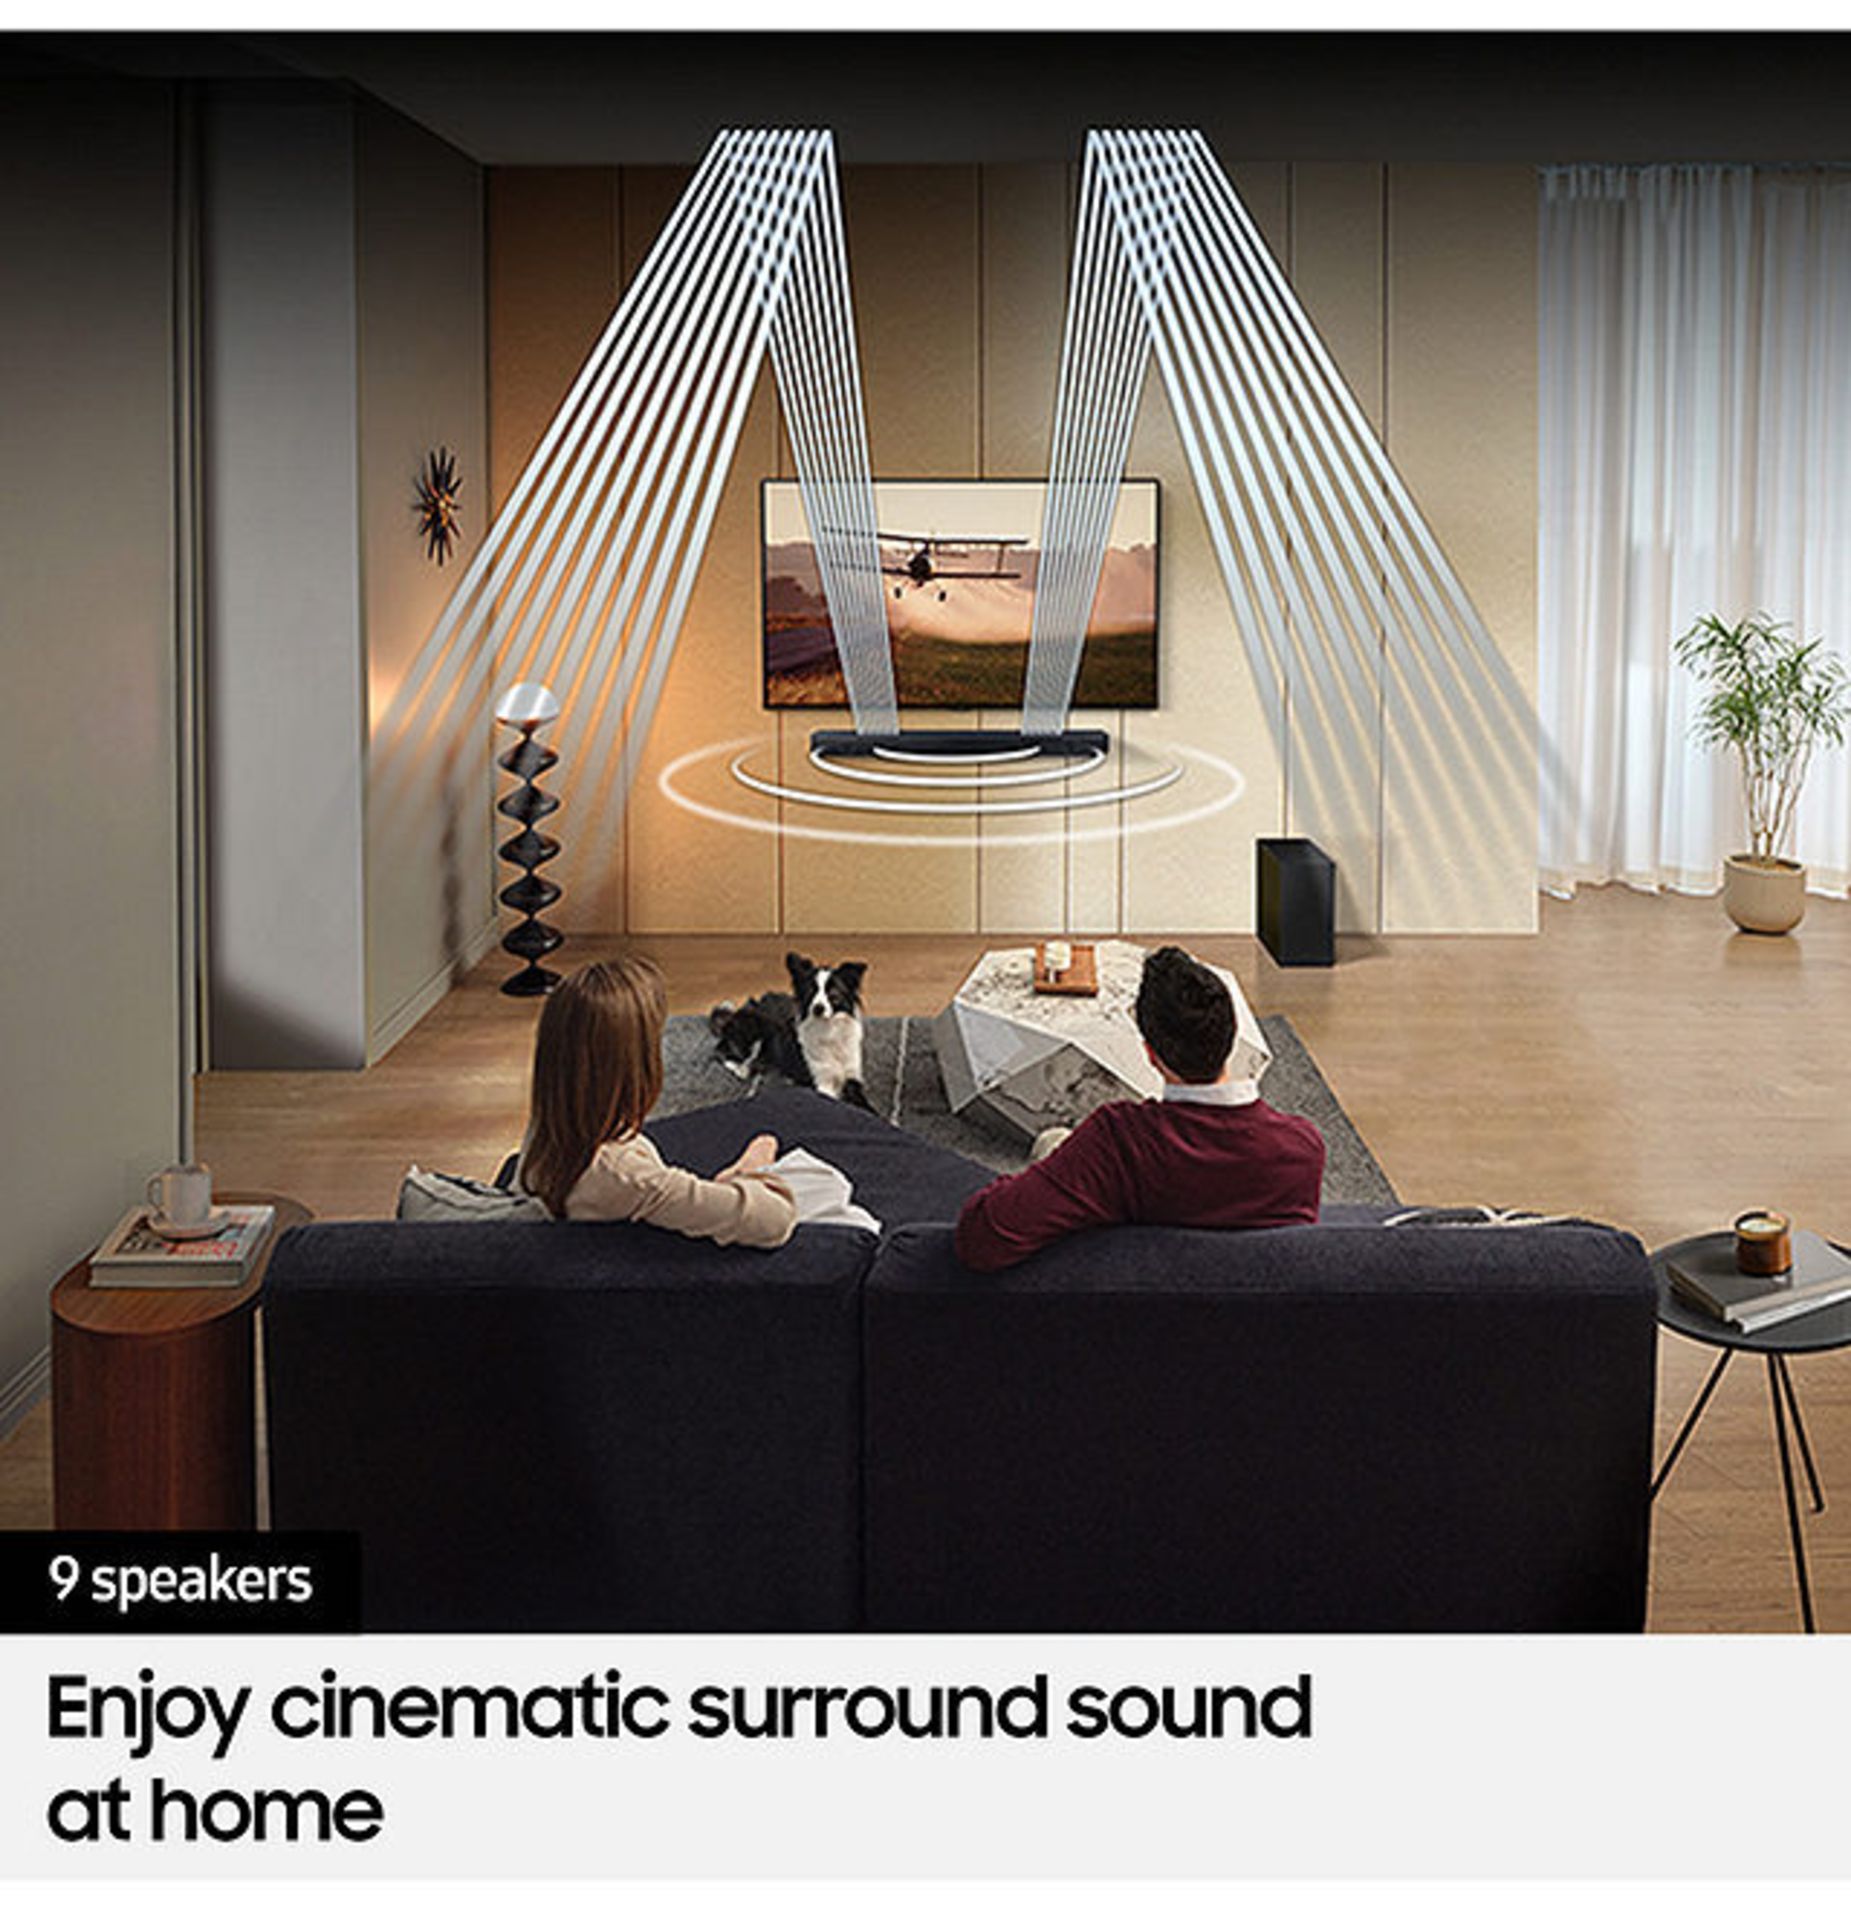 SAMSUNG HW-Q600C/XU 3.1.2 WIRELESS SOUND BAR WITH DOLBY ATMOS - WITH WARRANTY PACK - RRP £599 - Image 7 of 8